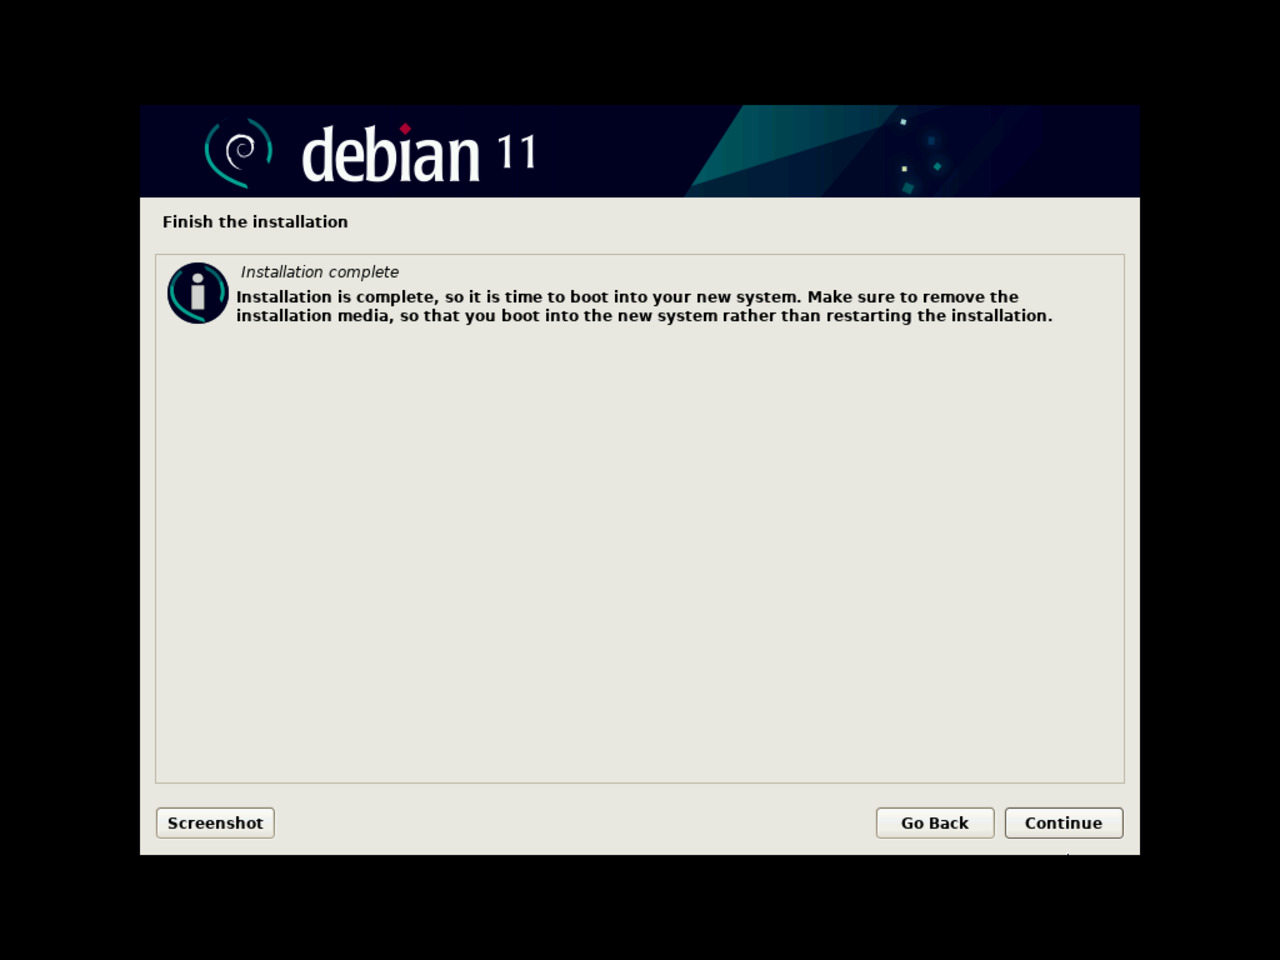 My first Linux laptop - Re-initiate the system to continue with the Debian installation (shutdown / restart)